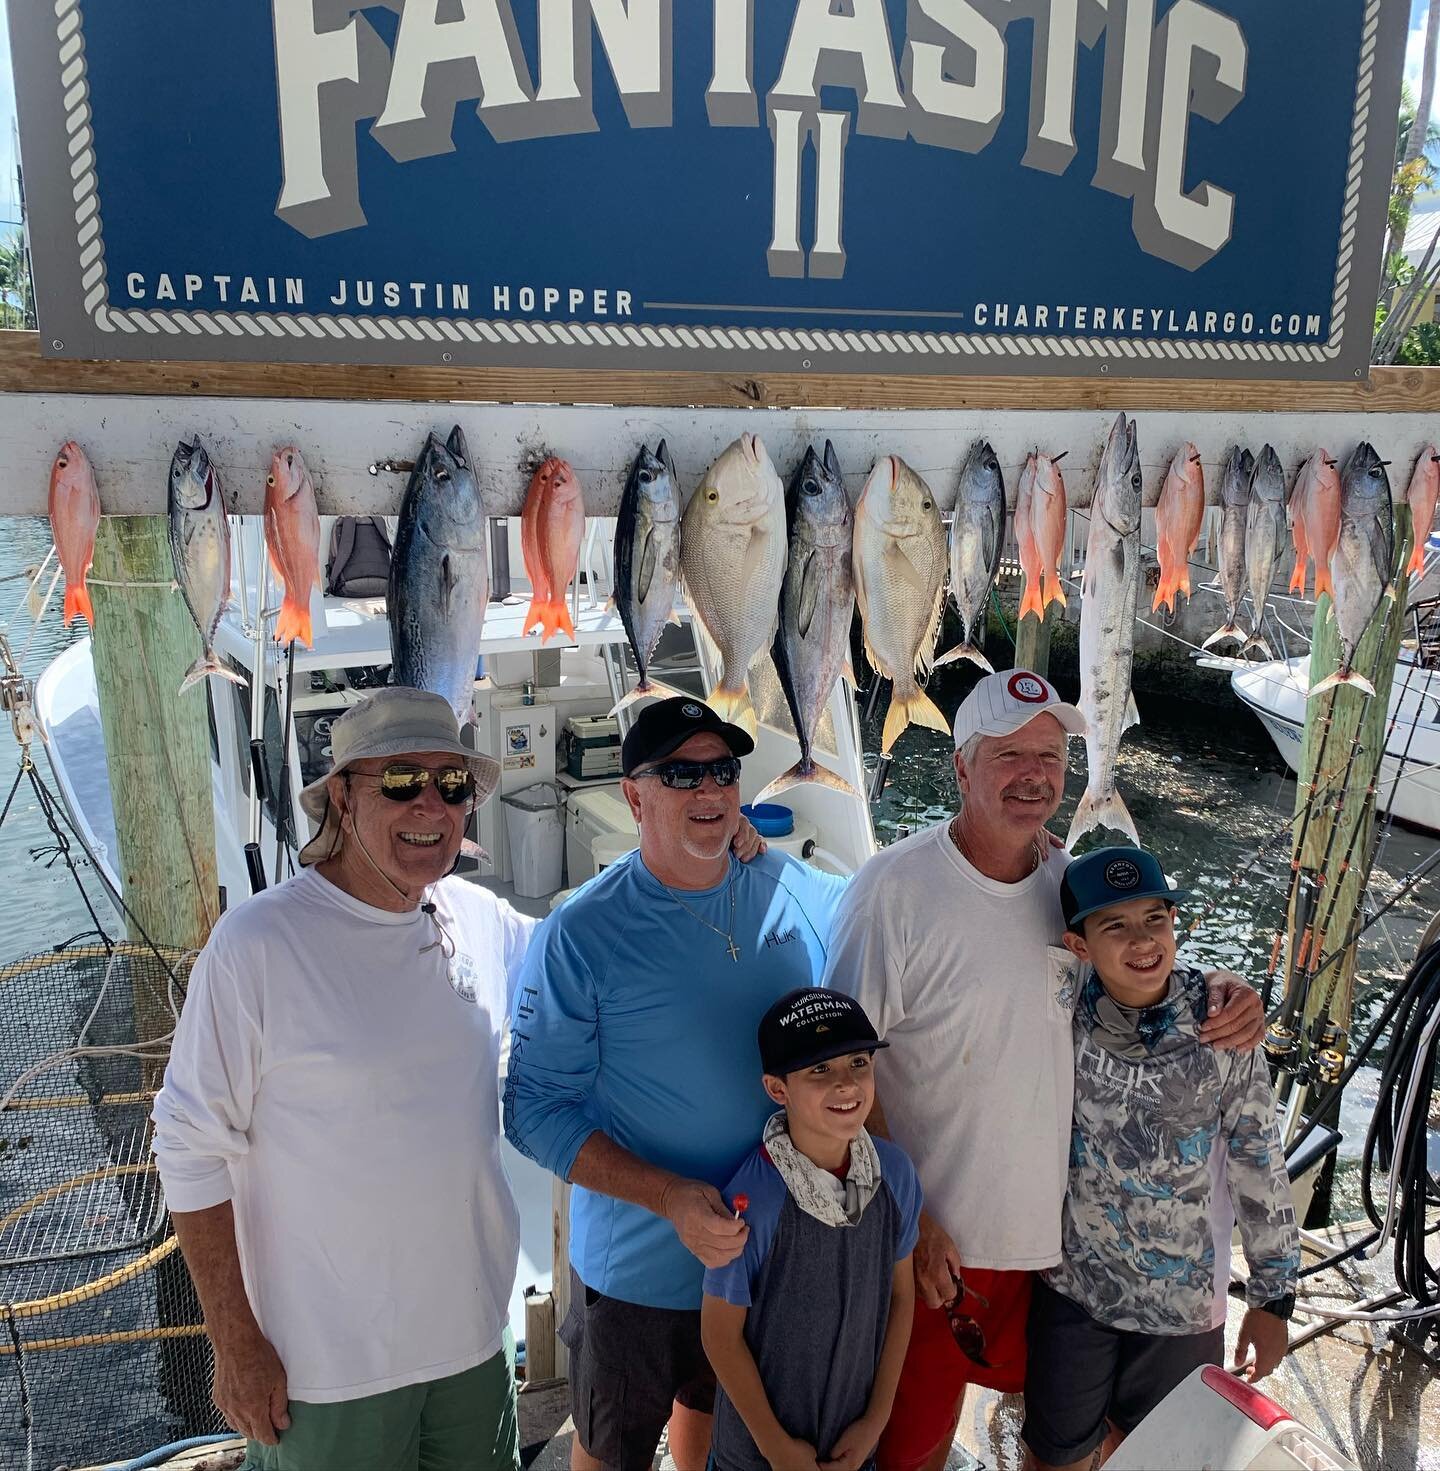 Lots of action for the boys on their half day with #fantasticII. Mixed bag of tuna, snapper, and porgy. 

&bull;#GUARANTEEDFISH 
&bull;
&bull;
#porgy #tuna #snappers #offshore #keylargo #flkeys #charterboat #busdriver #waterpark #mm💯 #november #verm